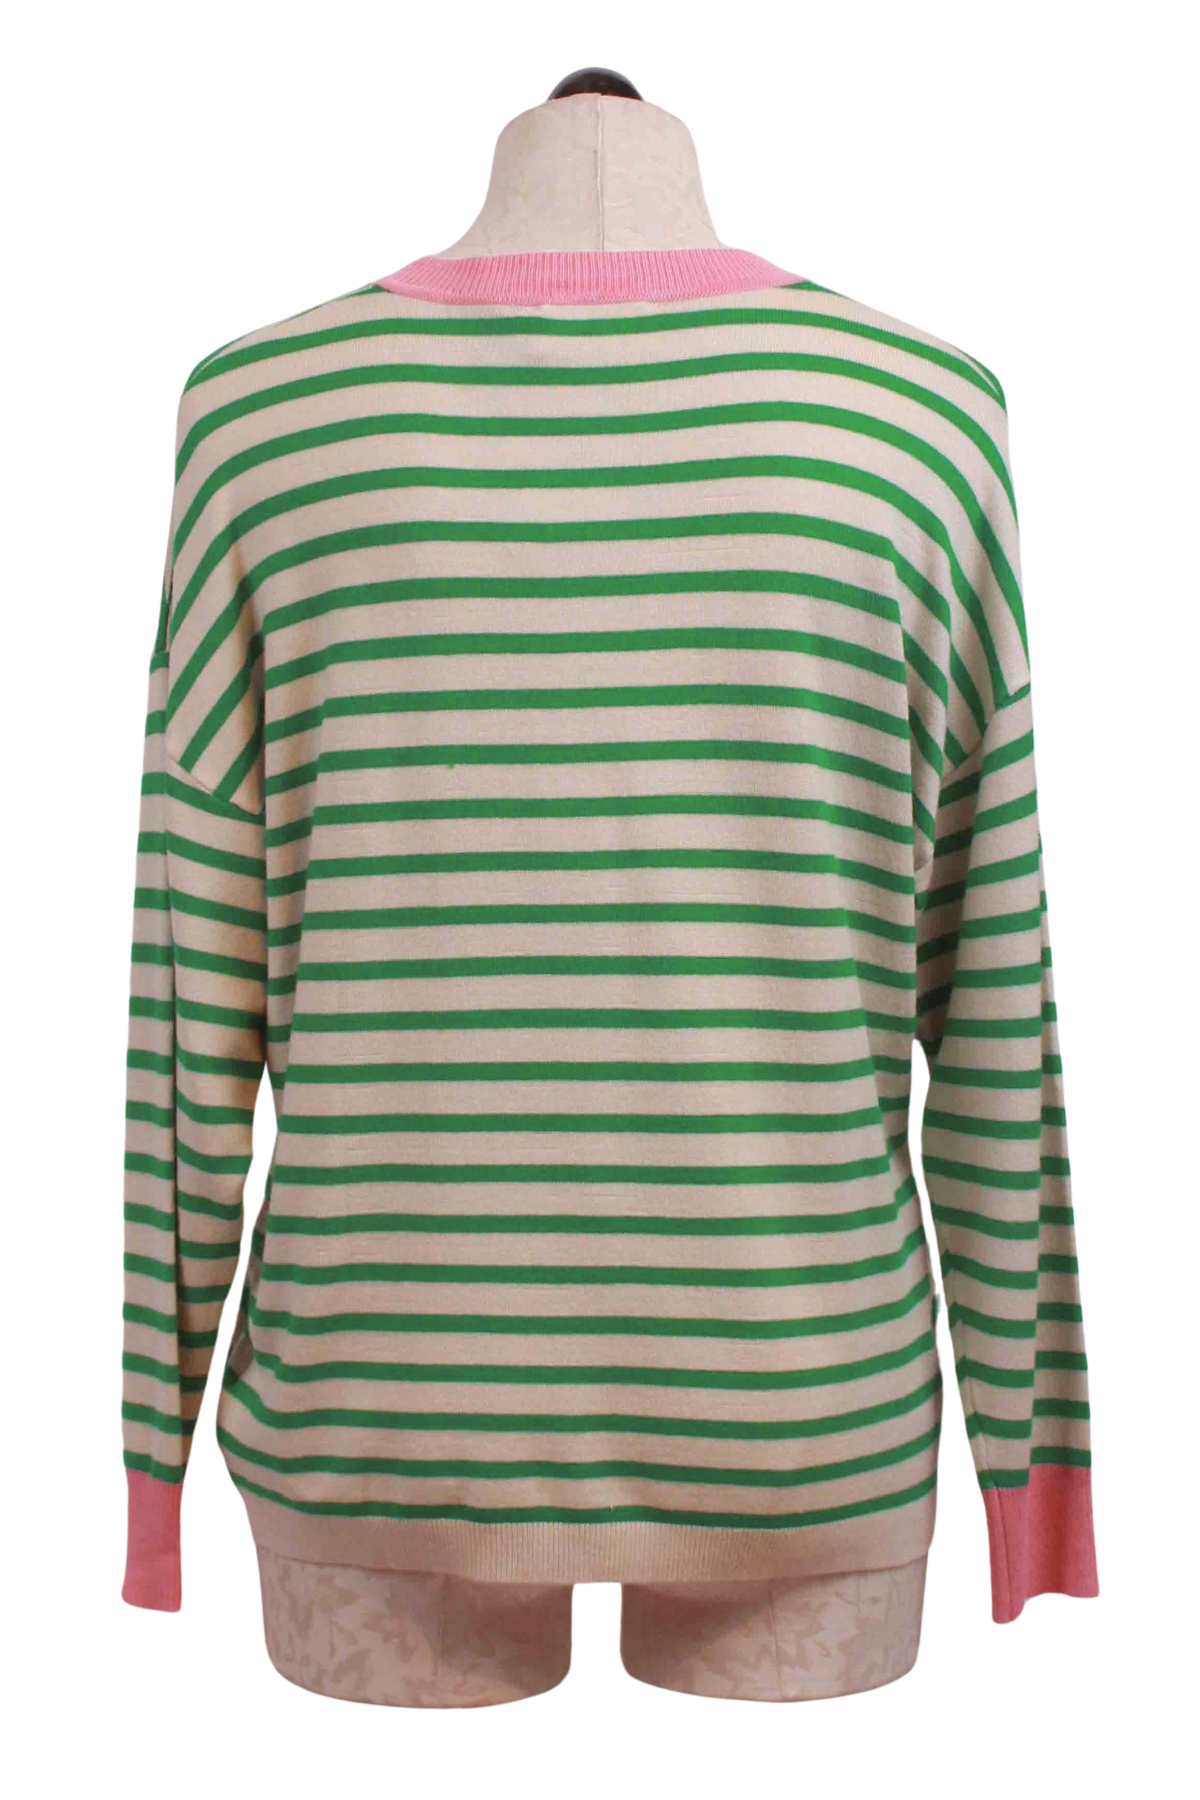 back view of Green and Ivory Oversized Striped Sweater by Compania Fantastic with Pink trim